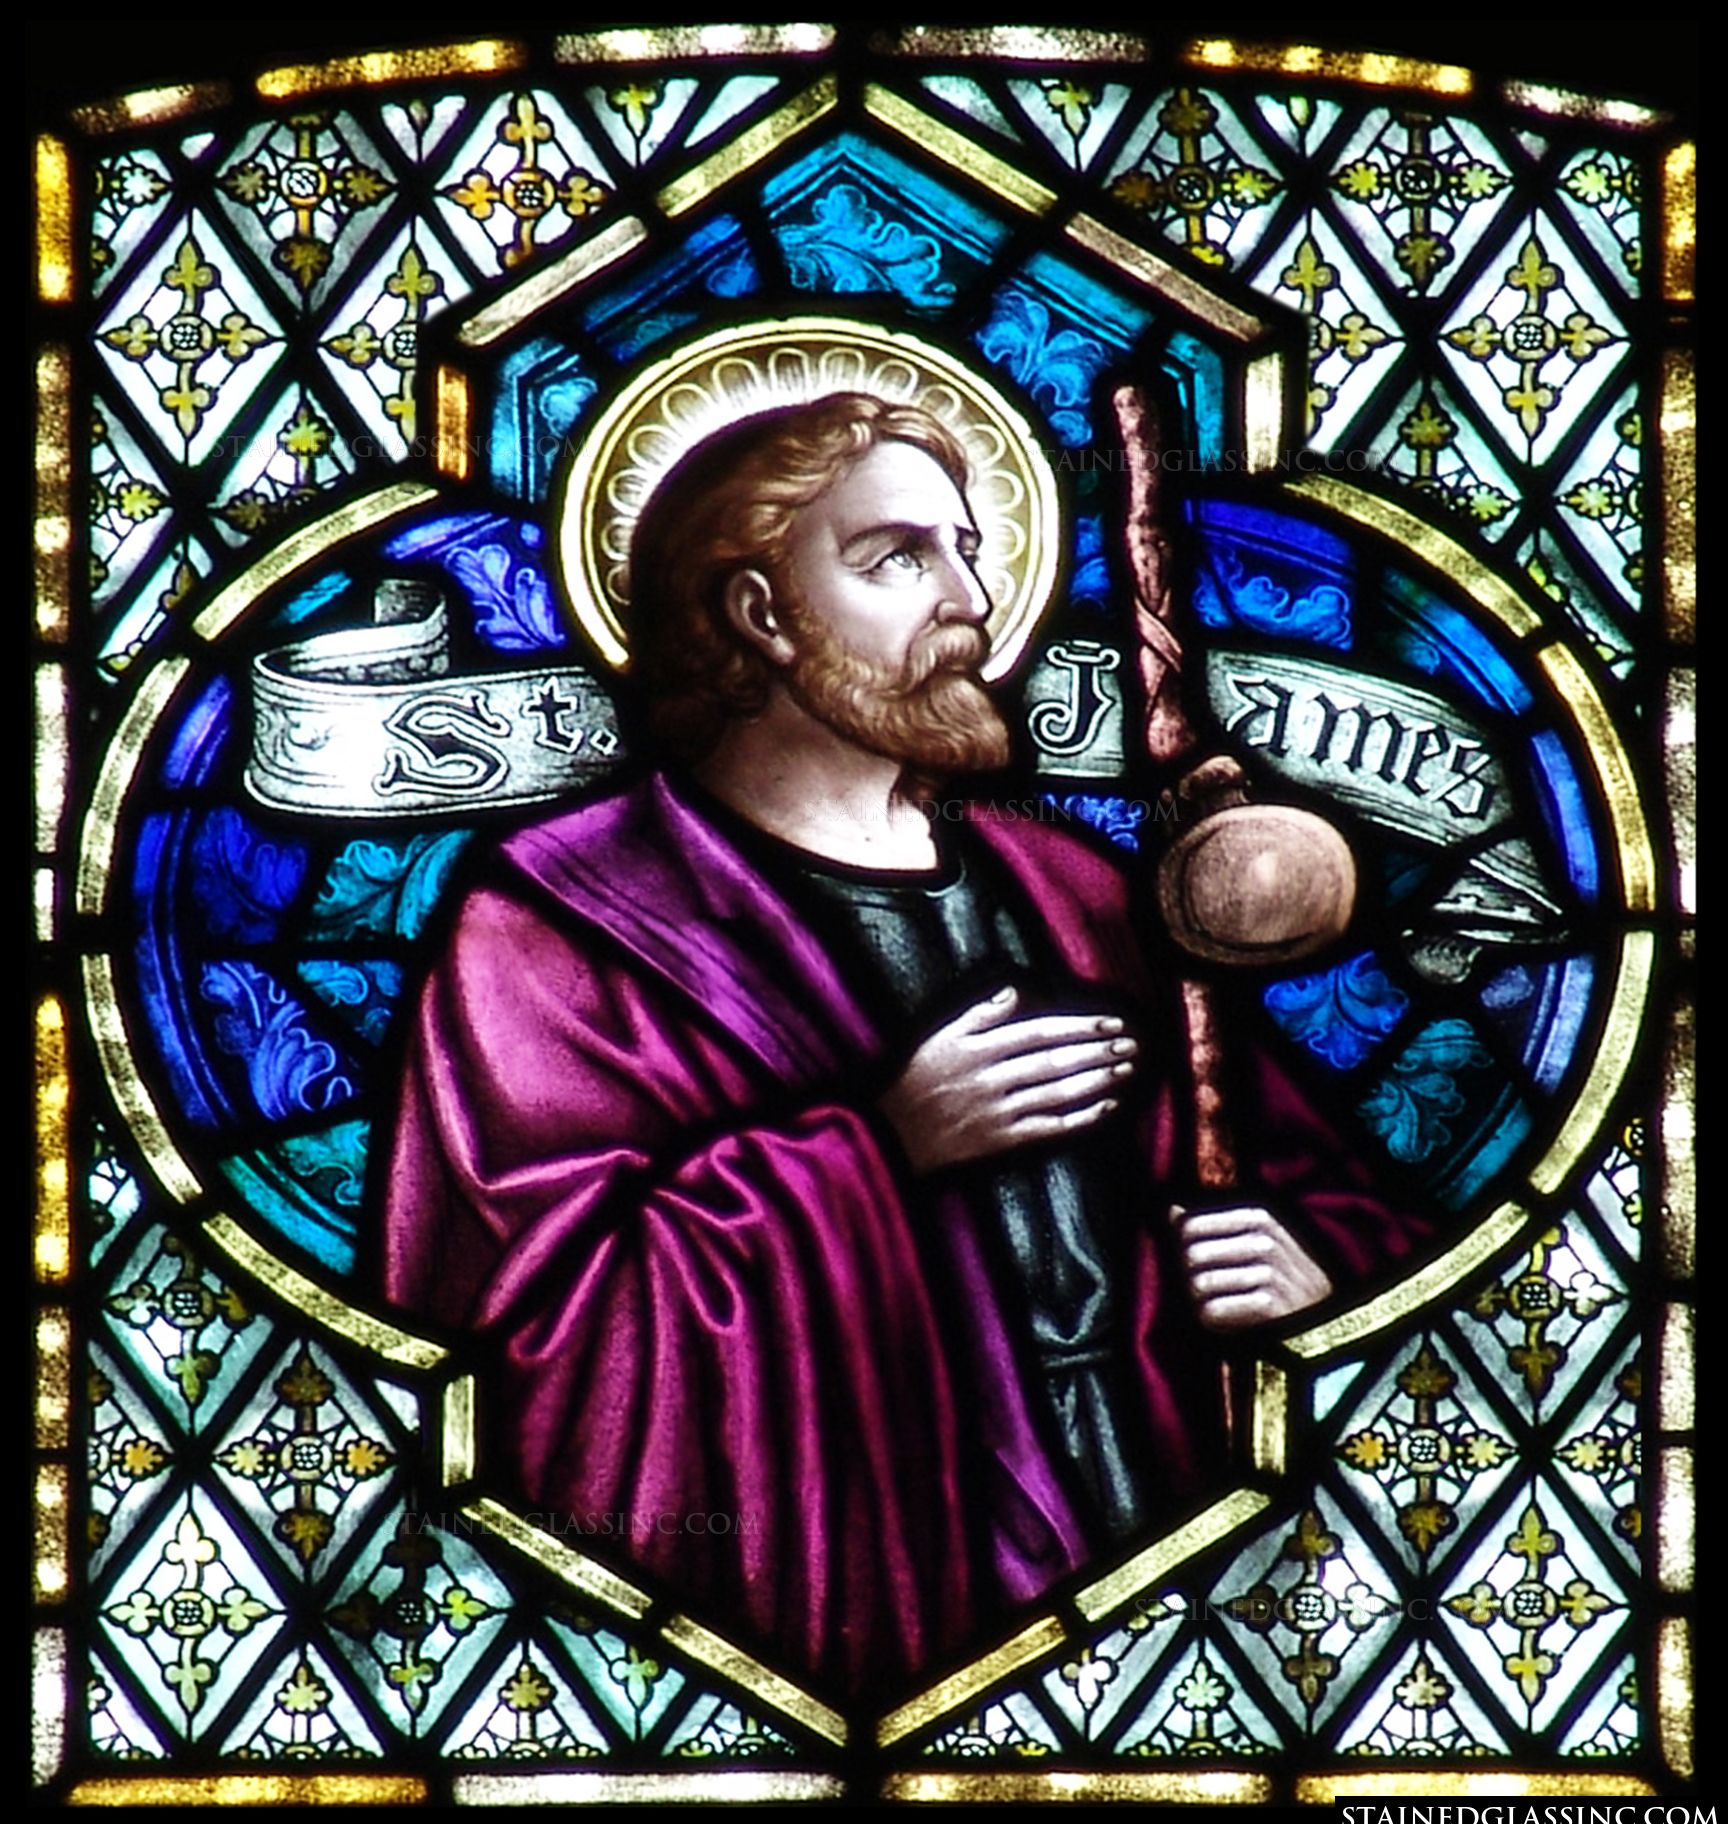 St. James" Religious Stained Glass Window